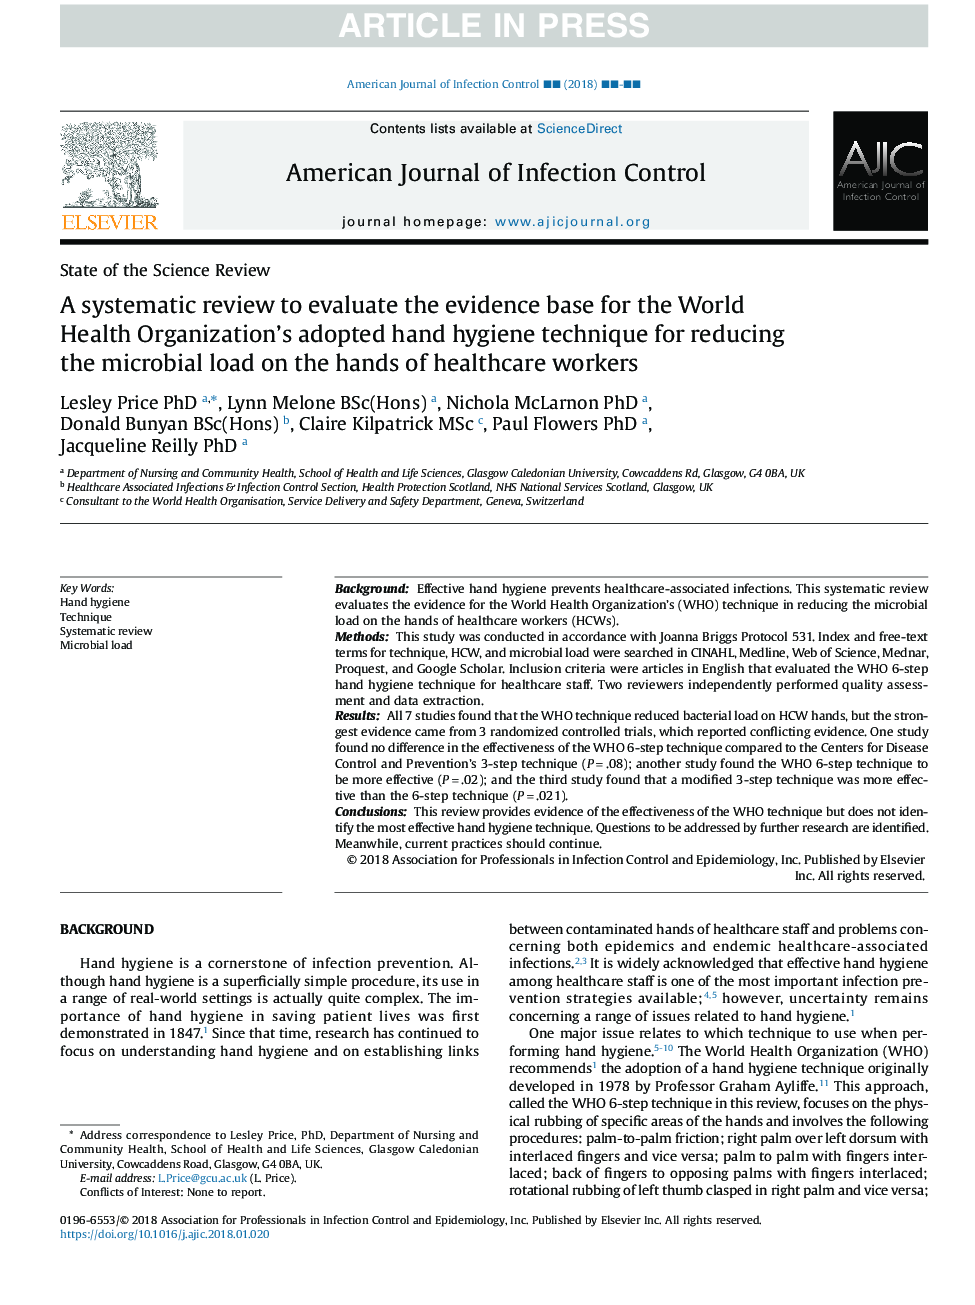 A systematic review to evaluate the evidence base for the World Health Organization's adopted hand hygiene technique for reducing the microbial load on the hands of healthcare workers